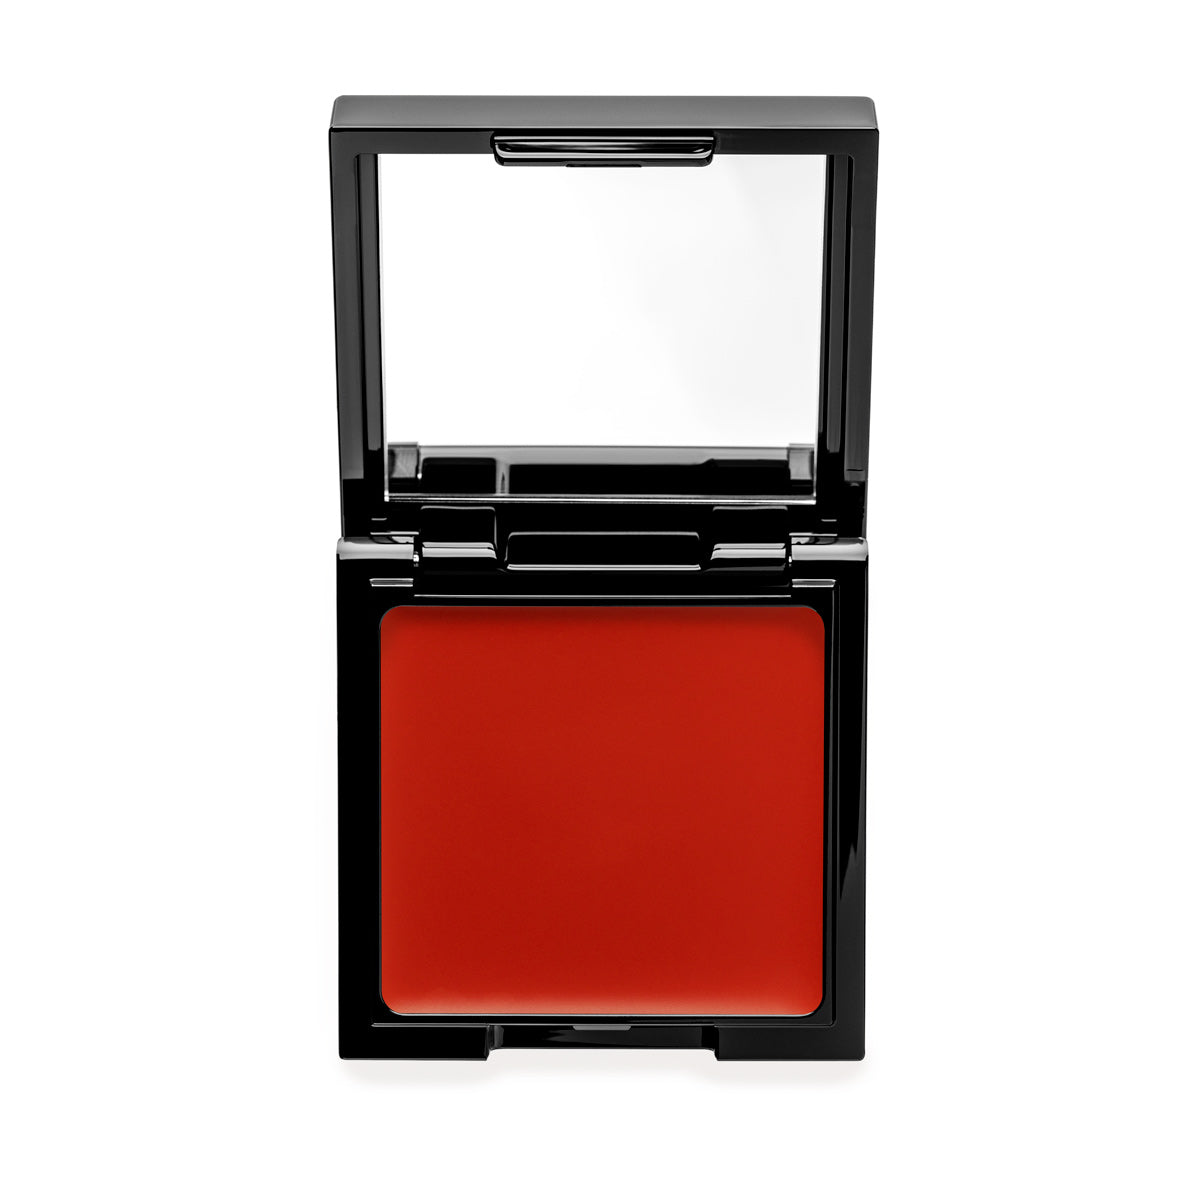 SHU IRO - LACQUER RED - cream eyeshadow eye gloss in lacquer red shade